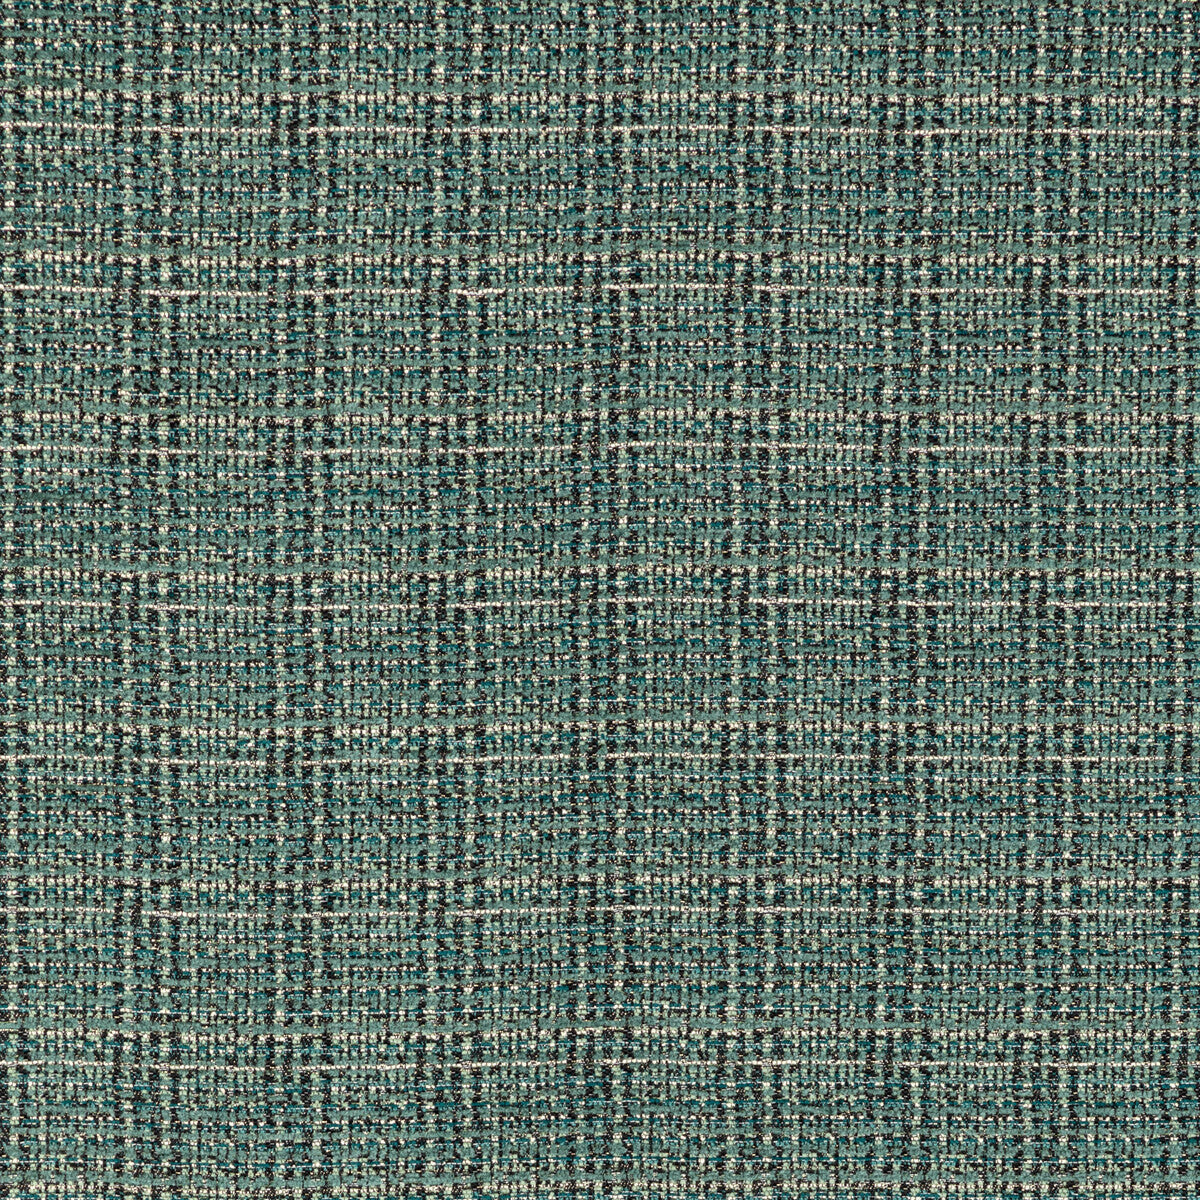 Ferla fabric in jadeite color - pattern 36313.830.0 - by Kravet Contract